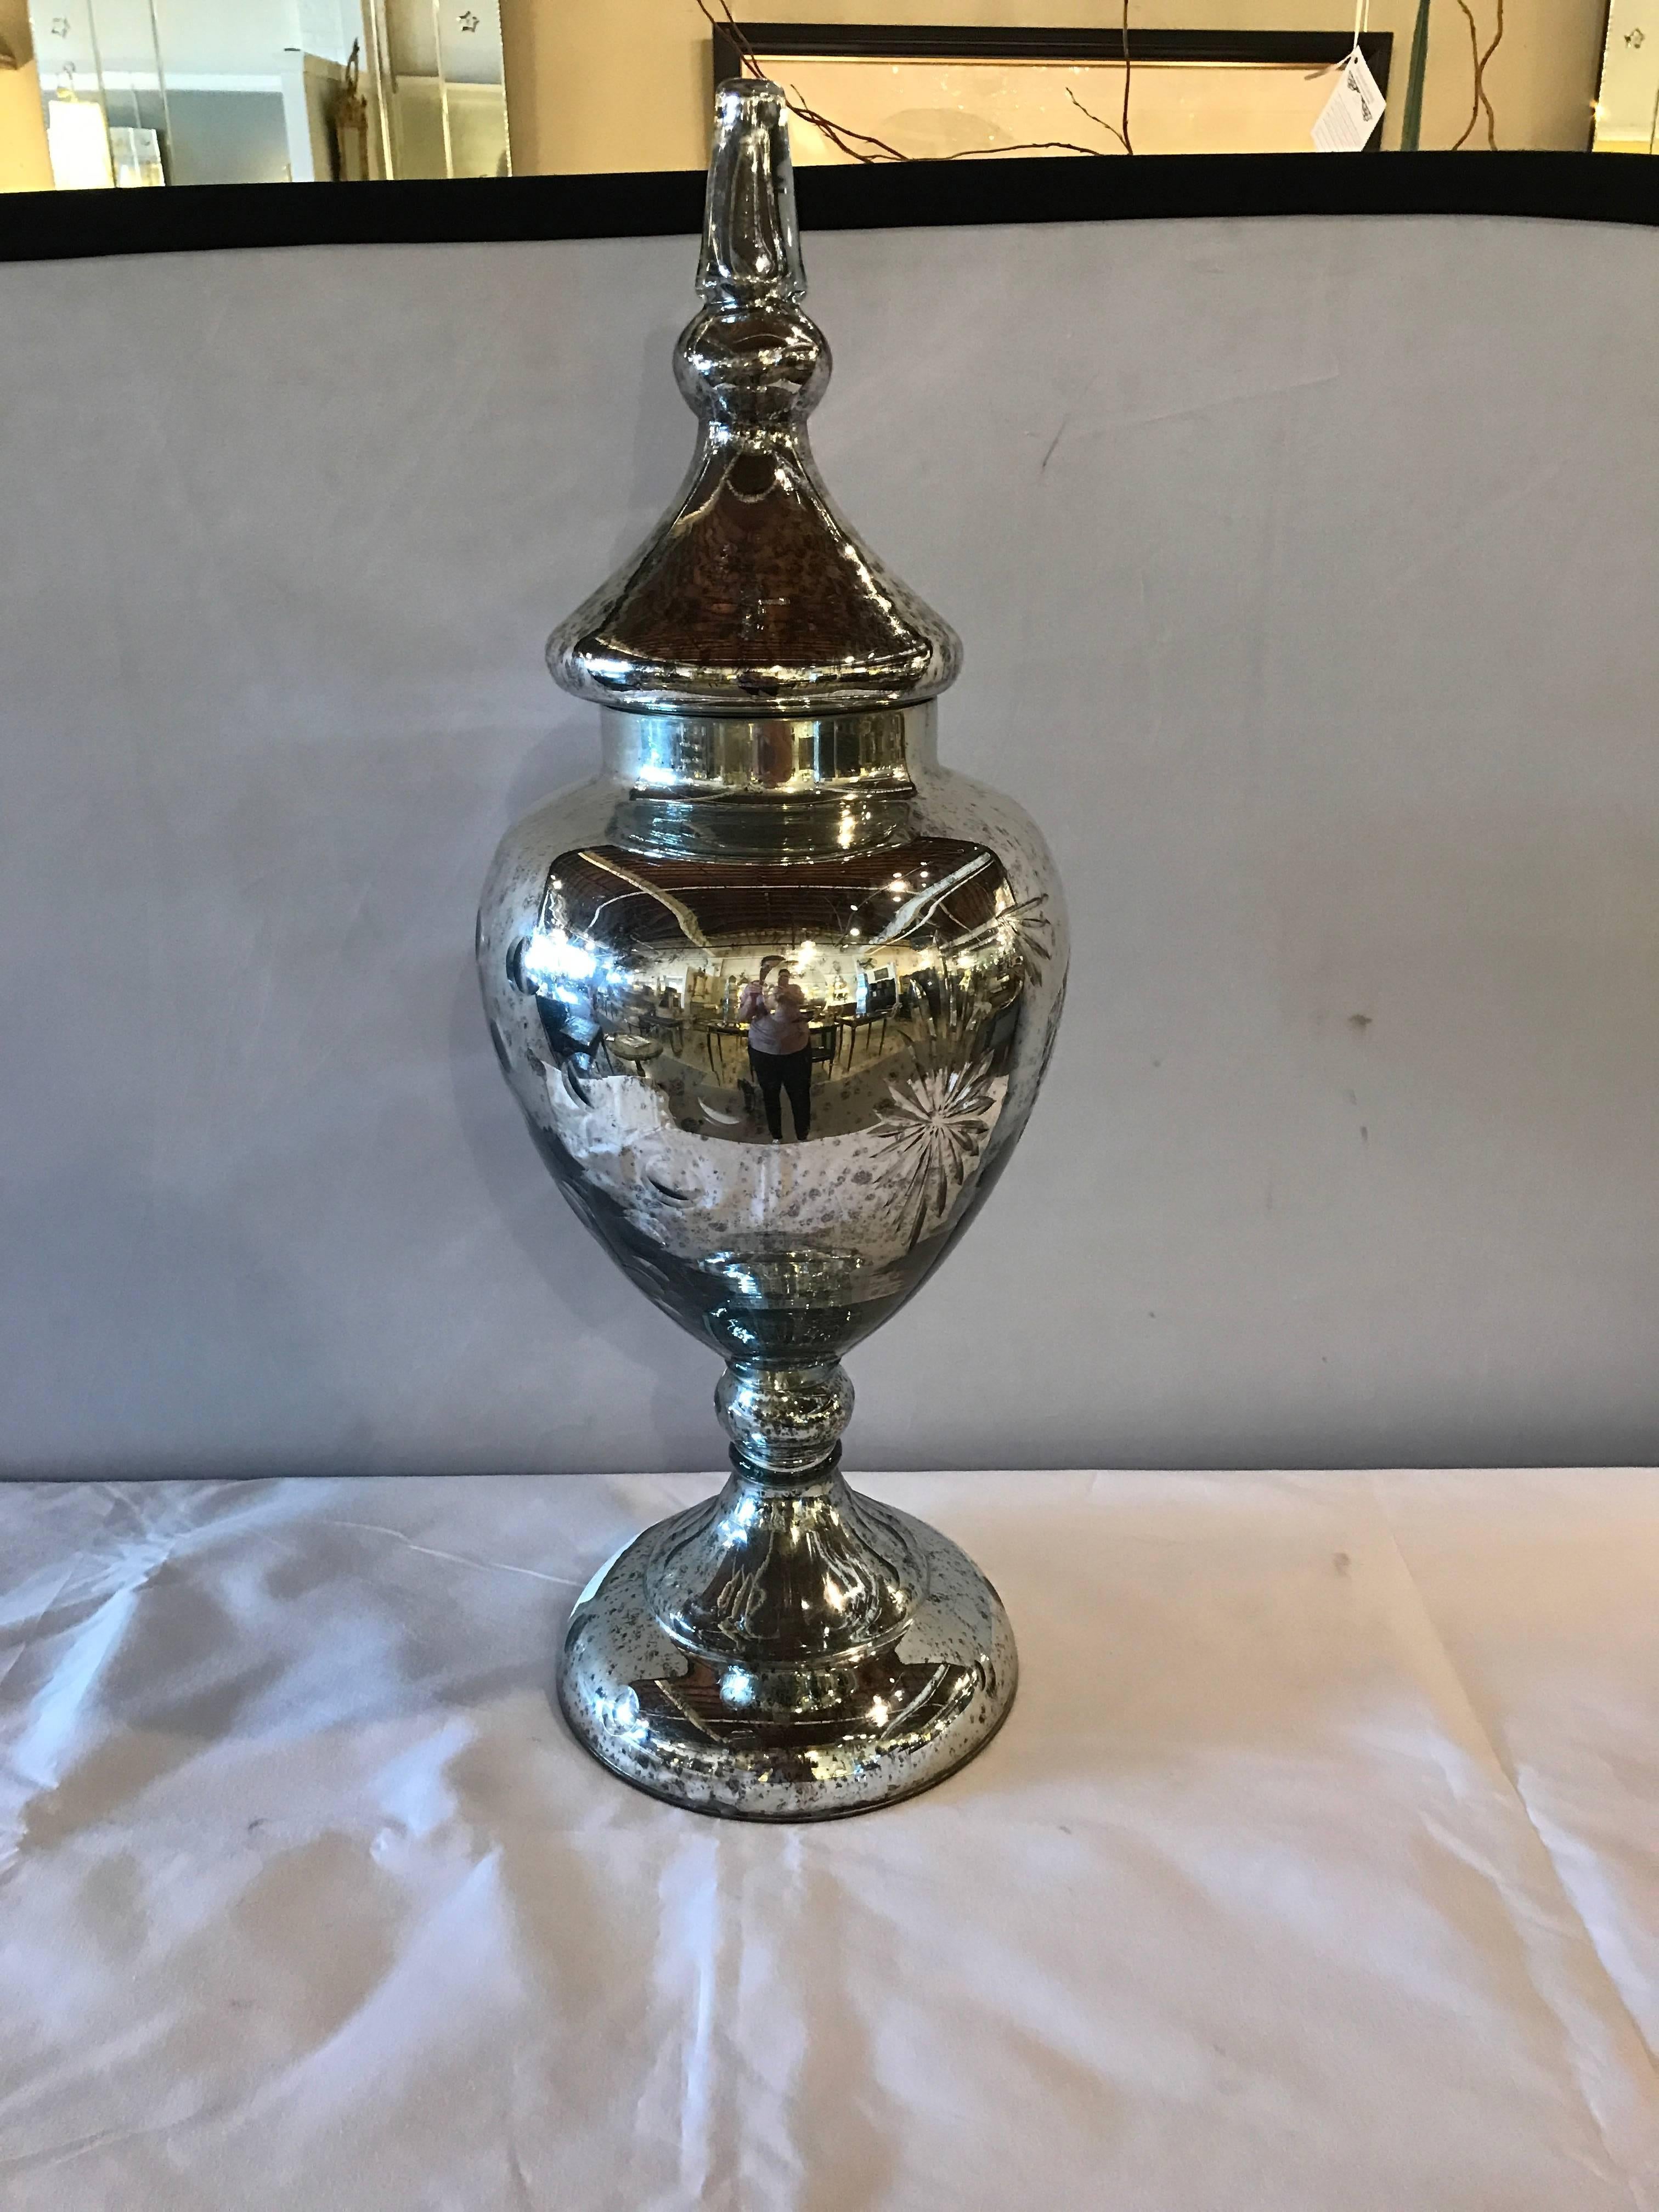 A pair of decorative mercury glass silver etched lidded urns. Several pair available. The price quoted if for one pair only.